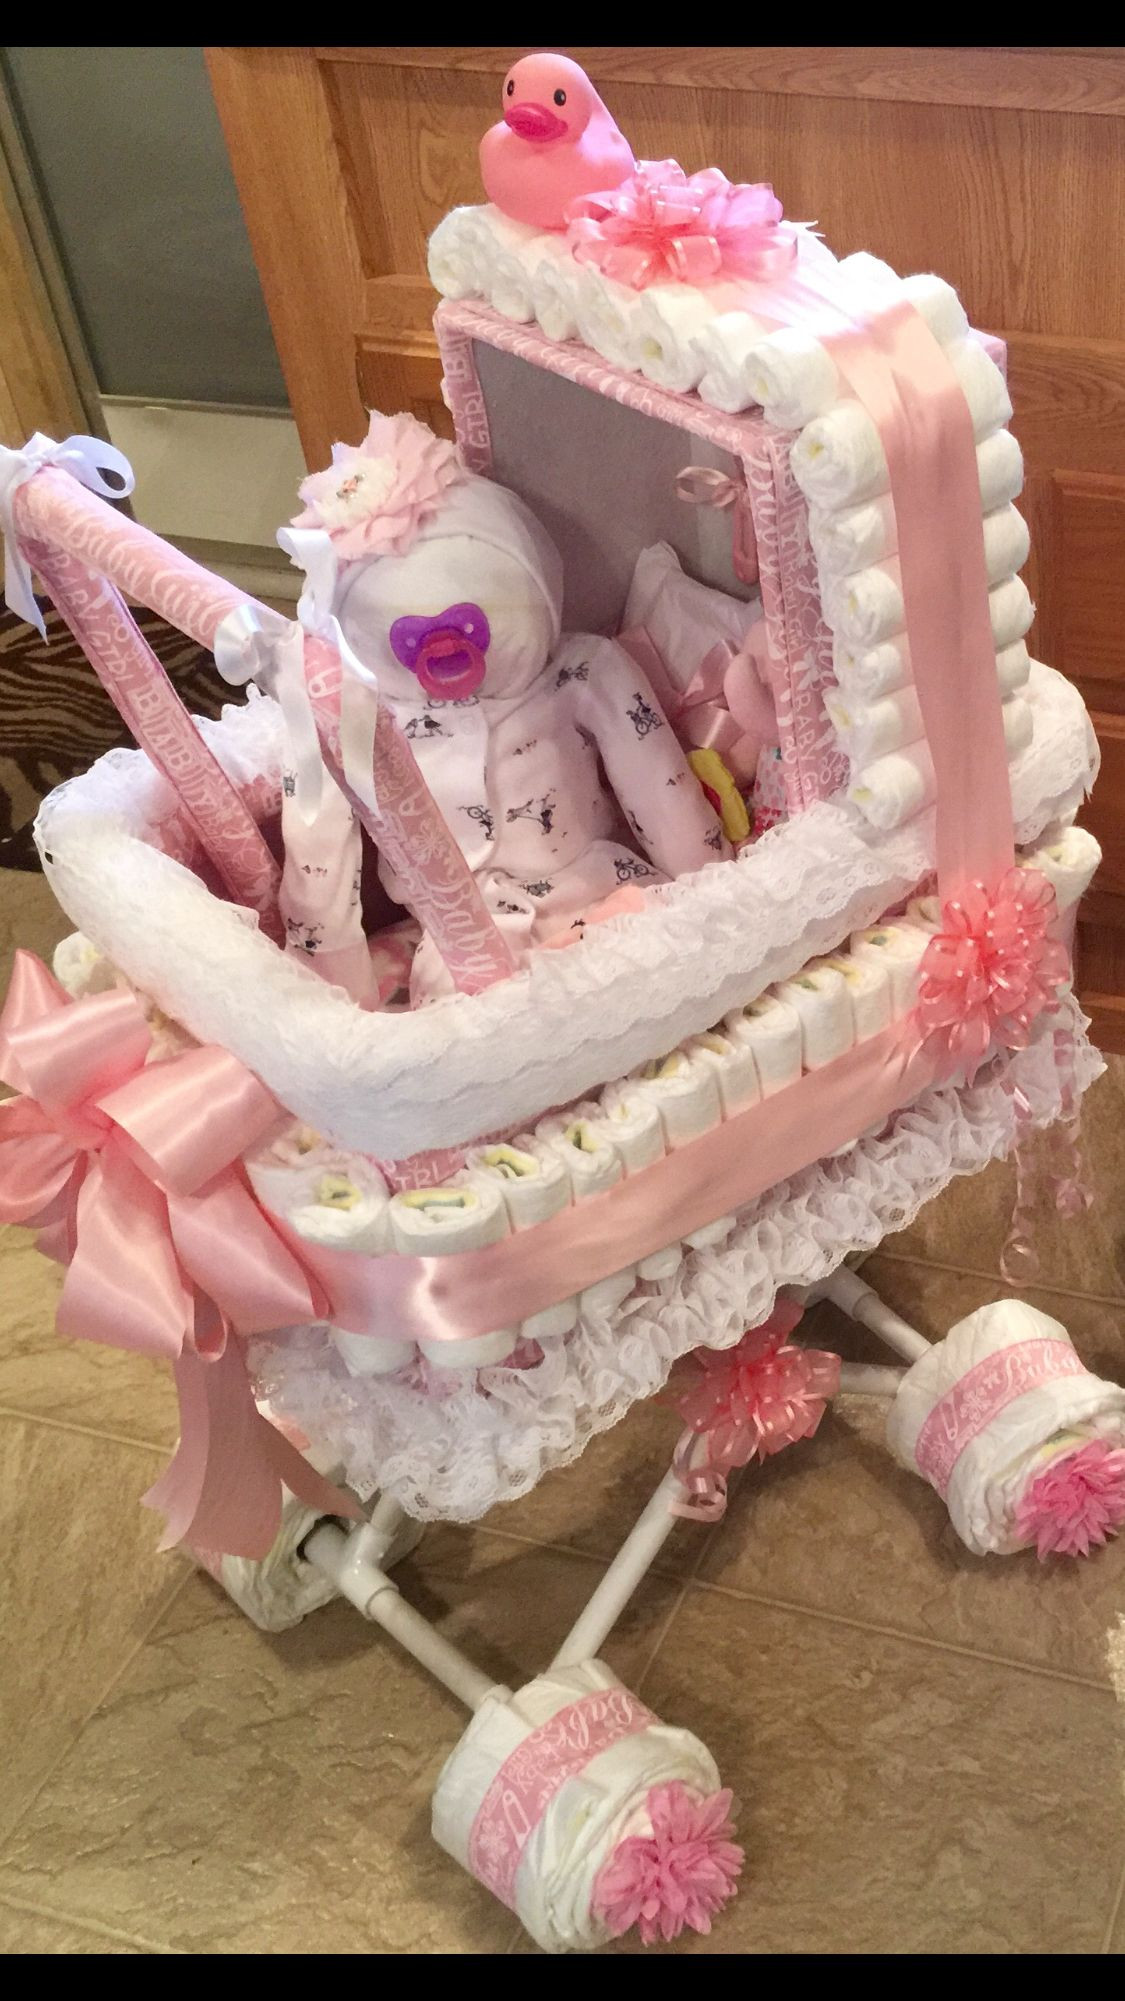 Baby Shower Gifts Made With Diapers
 Instead of a diaper cake for baby shower I made my